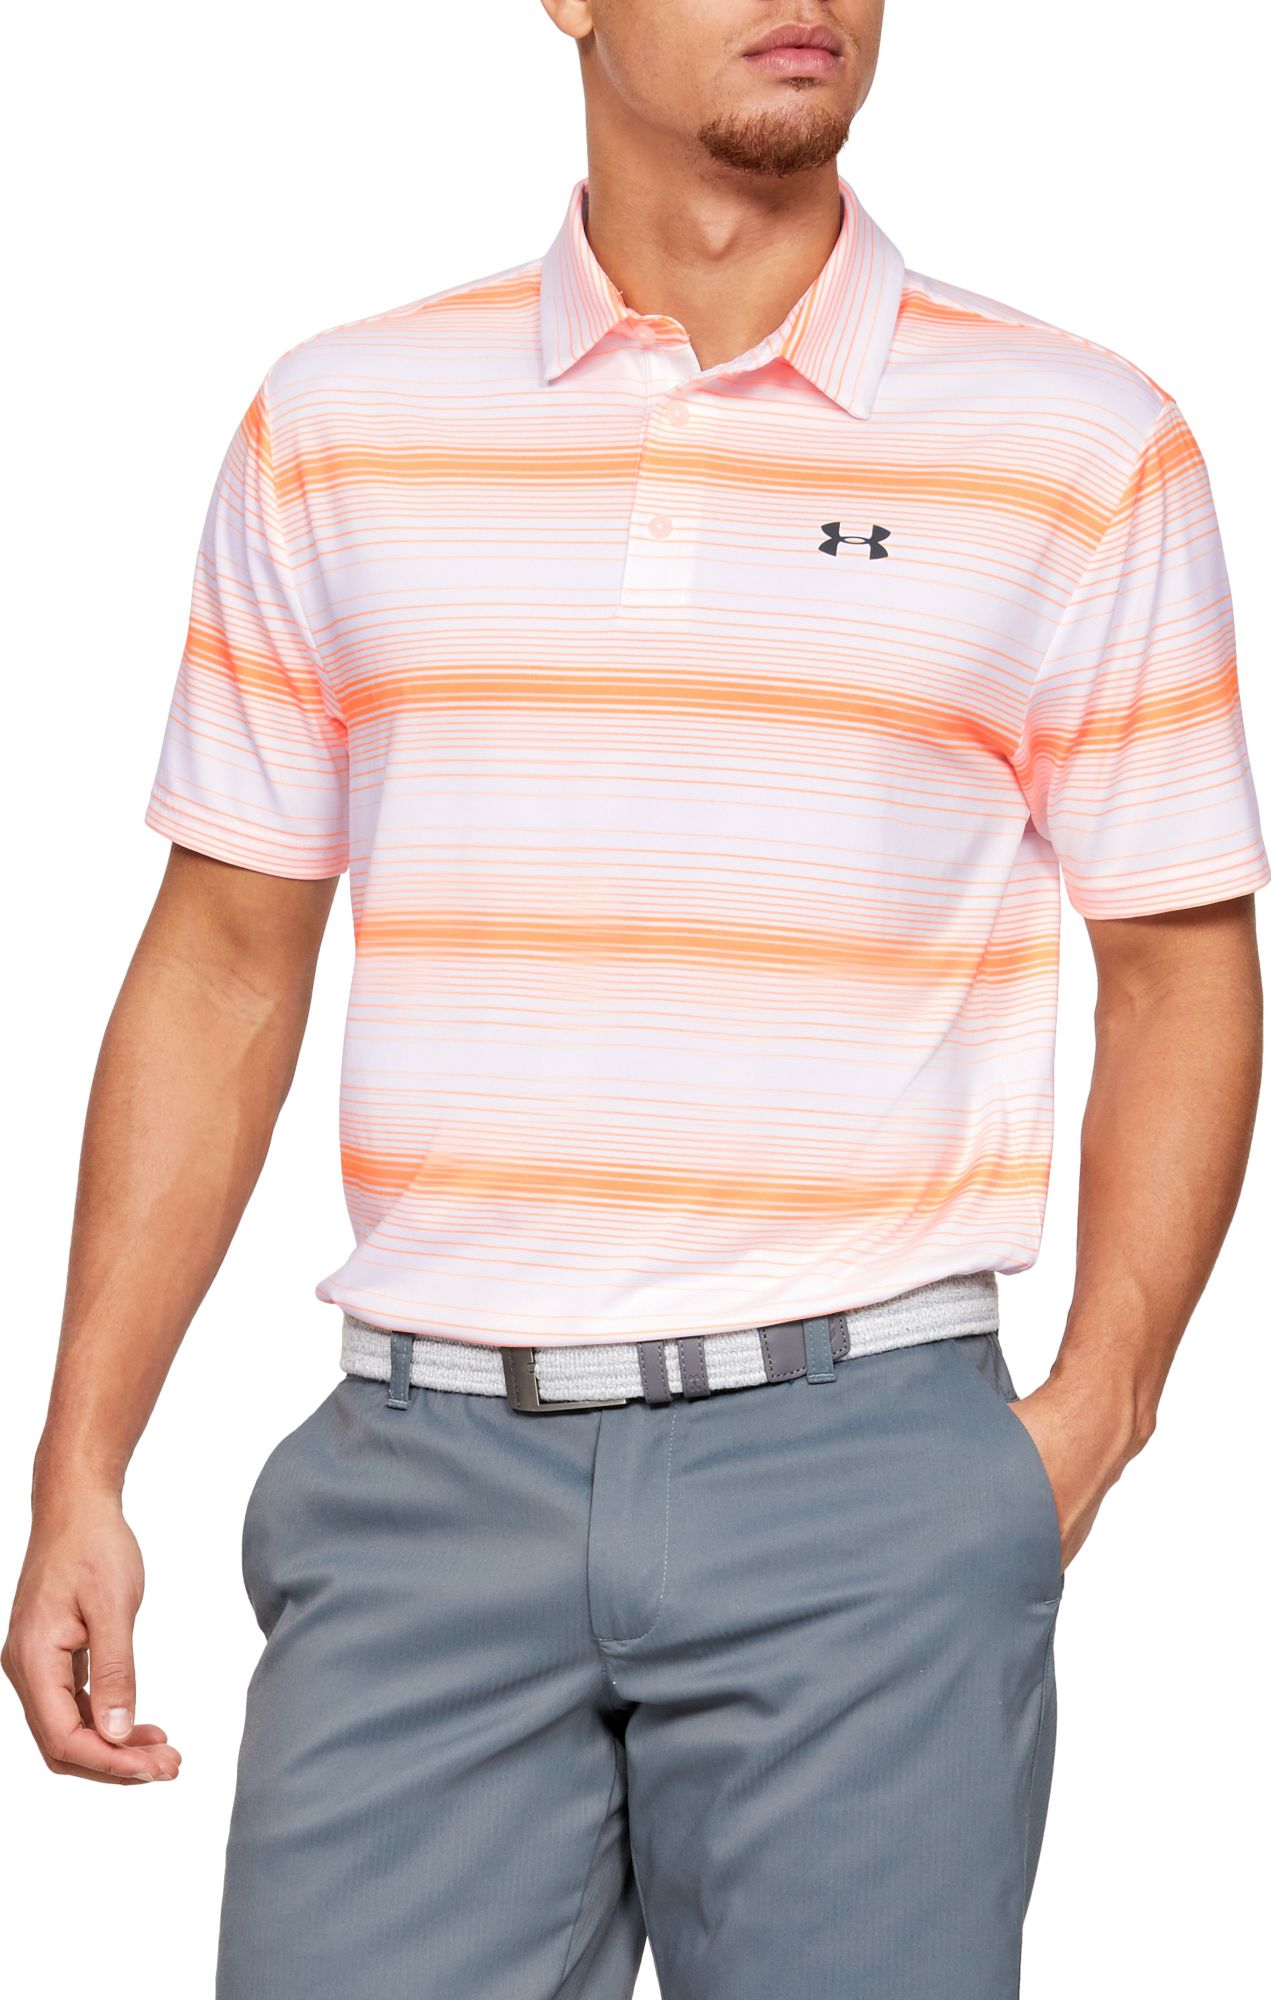 under armour men's playoff golf polo